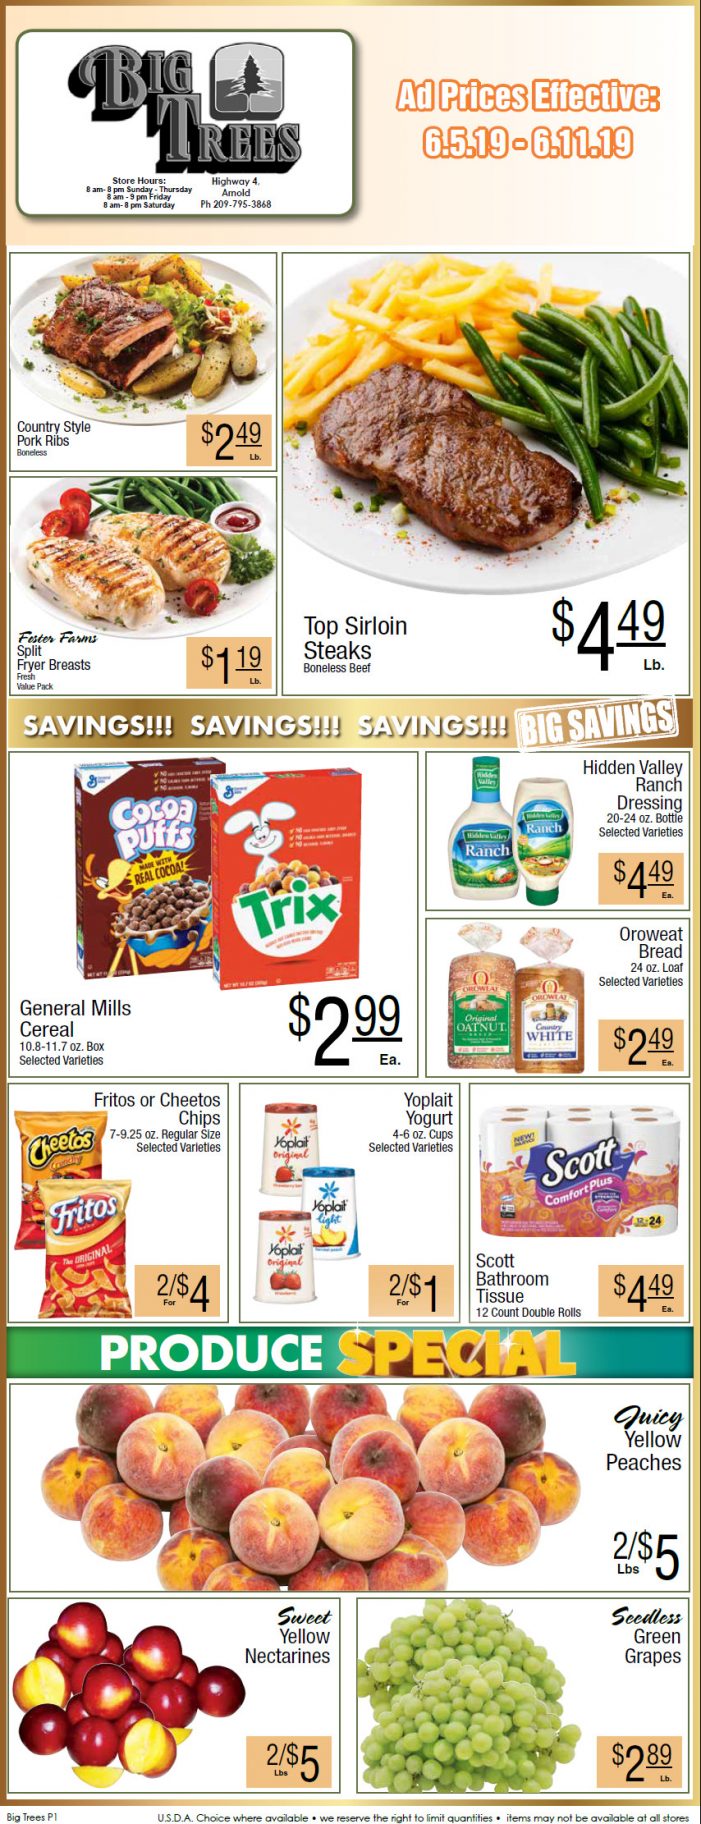 Big Trees Market Weekly Ad & Grocery Specials Through June 11th